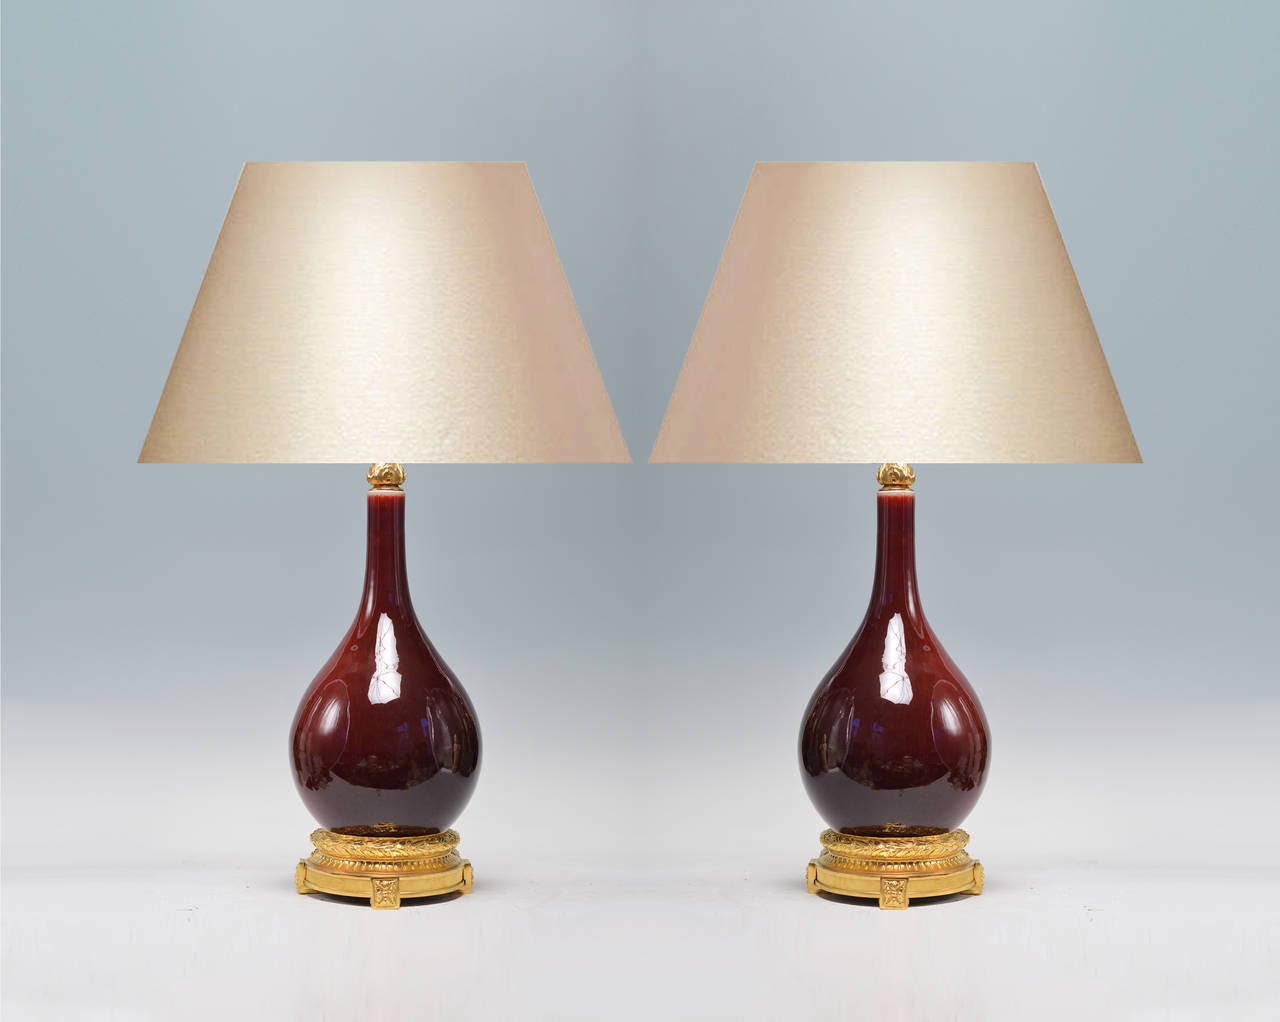 Pair of copper red-glazed porcelain lamps with gilt bronze bases
(Lampshade not included).